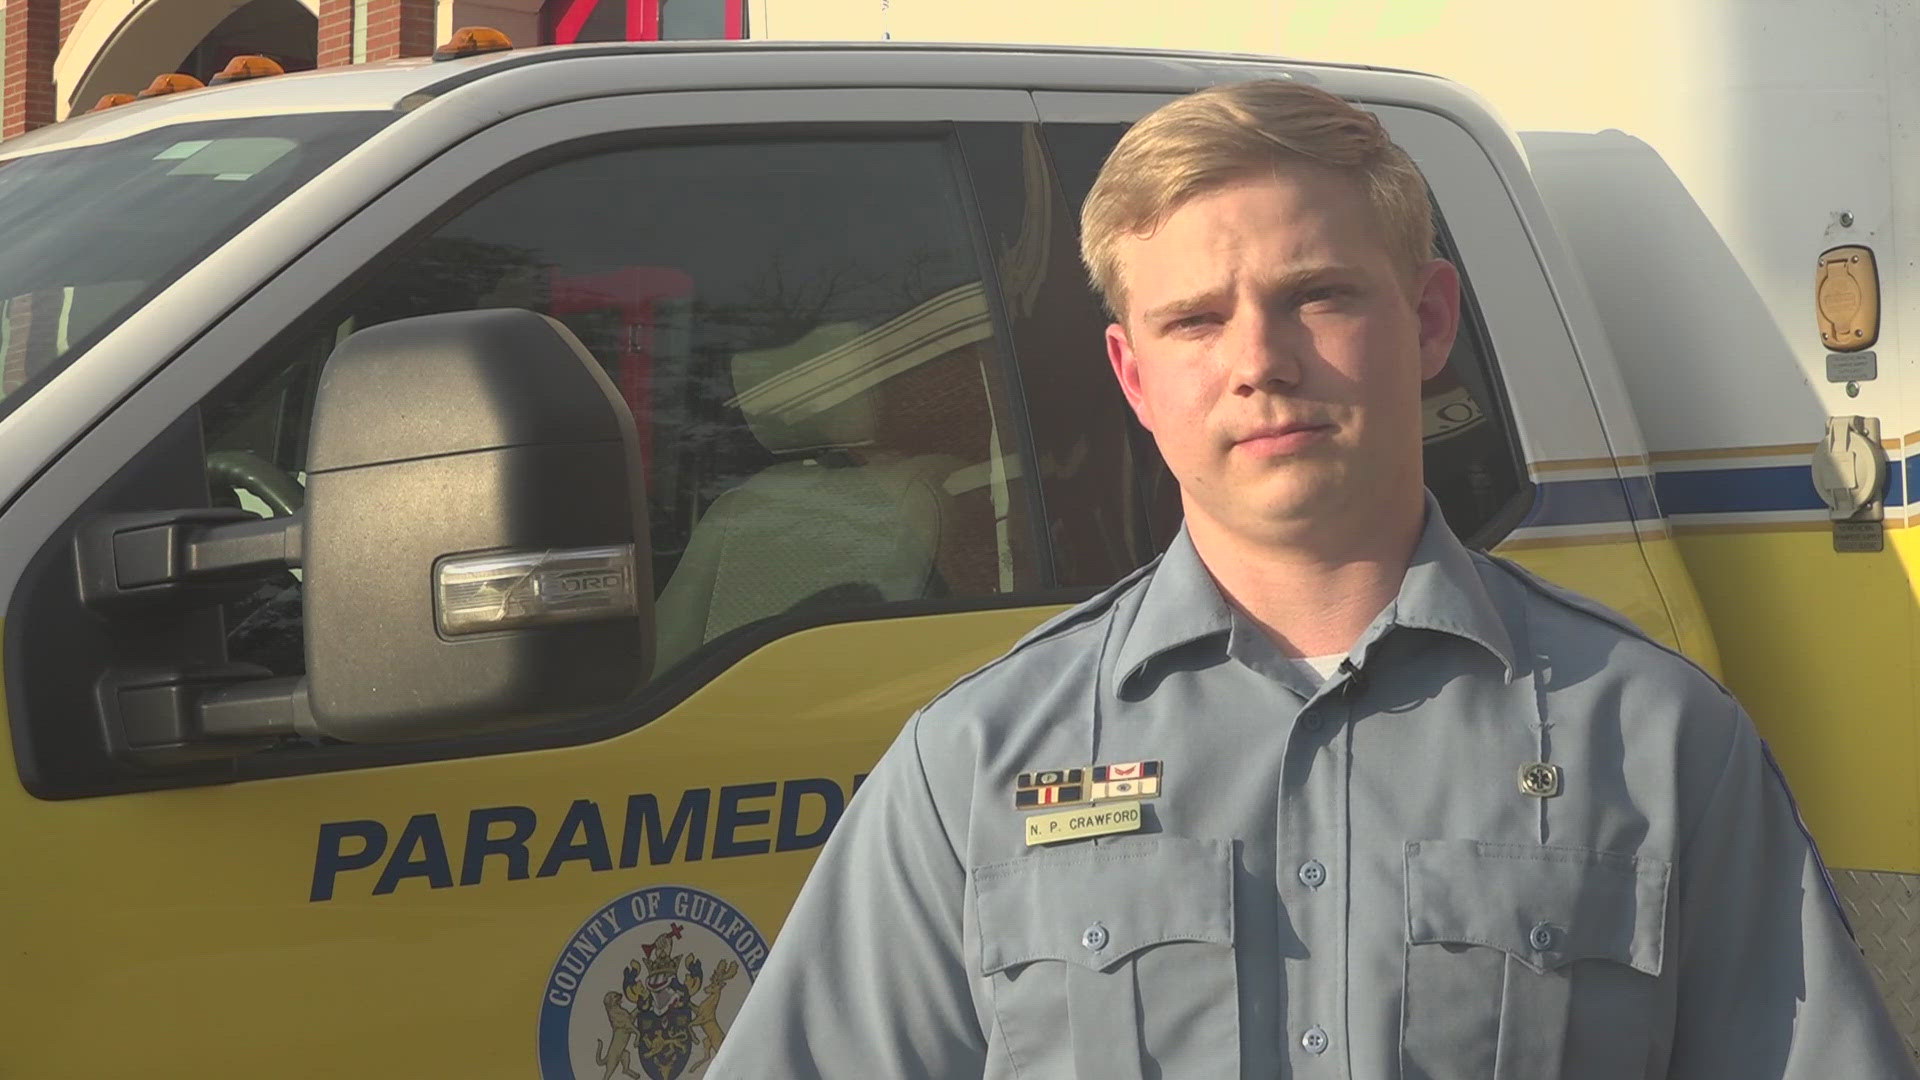 Nicholas Crawford used CPR to save three lives in Guilford County.